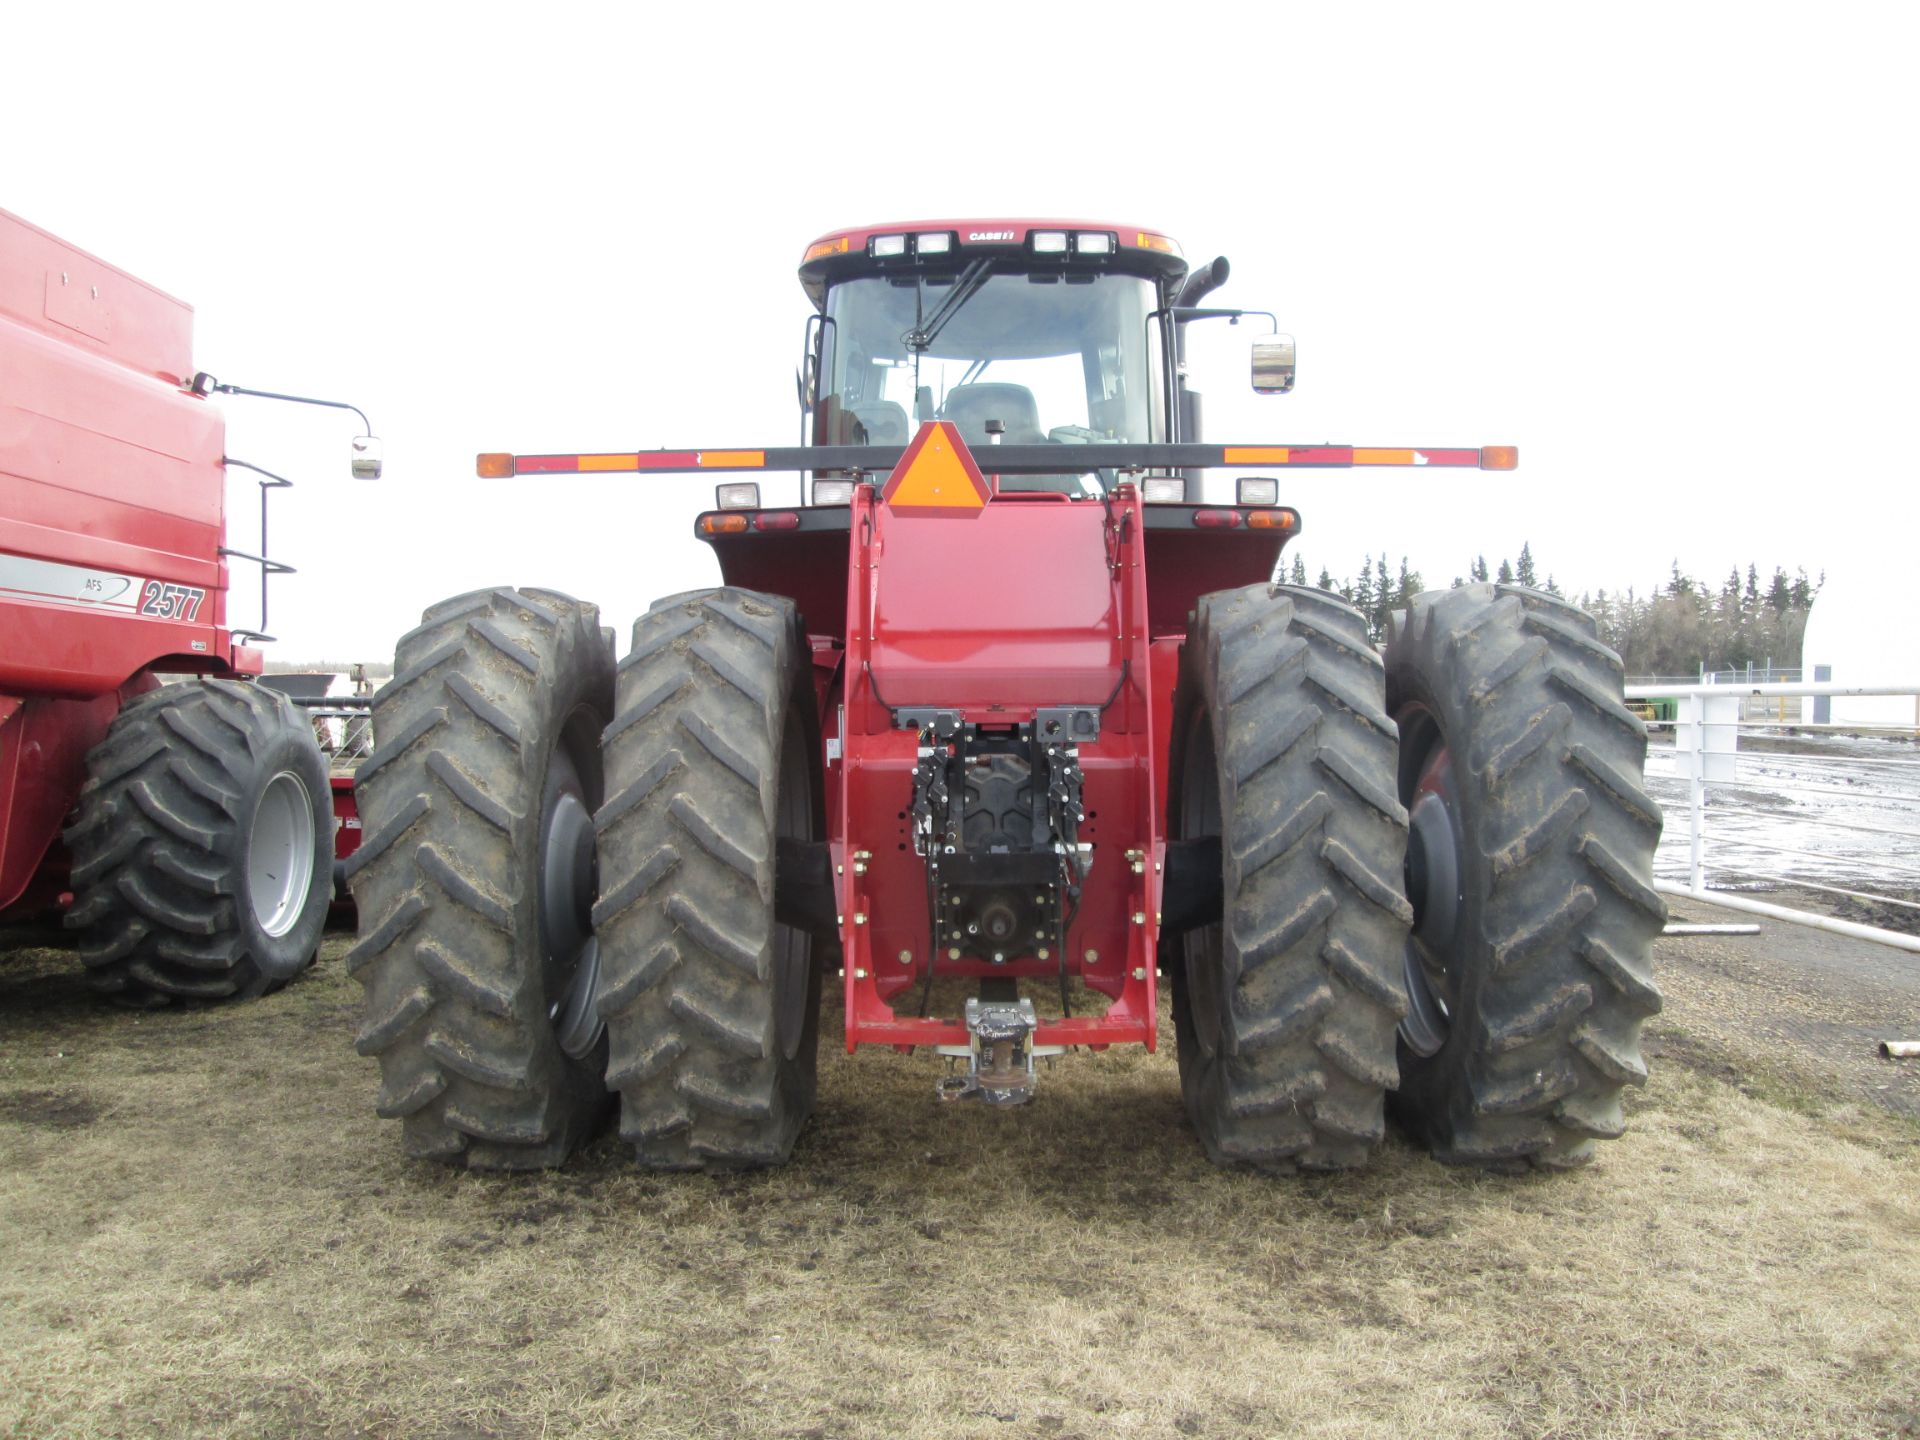 2011 CASE IH Steiger 350 HD 4wd Tractor - Image 8 of 11